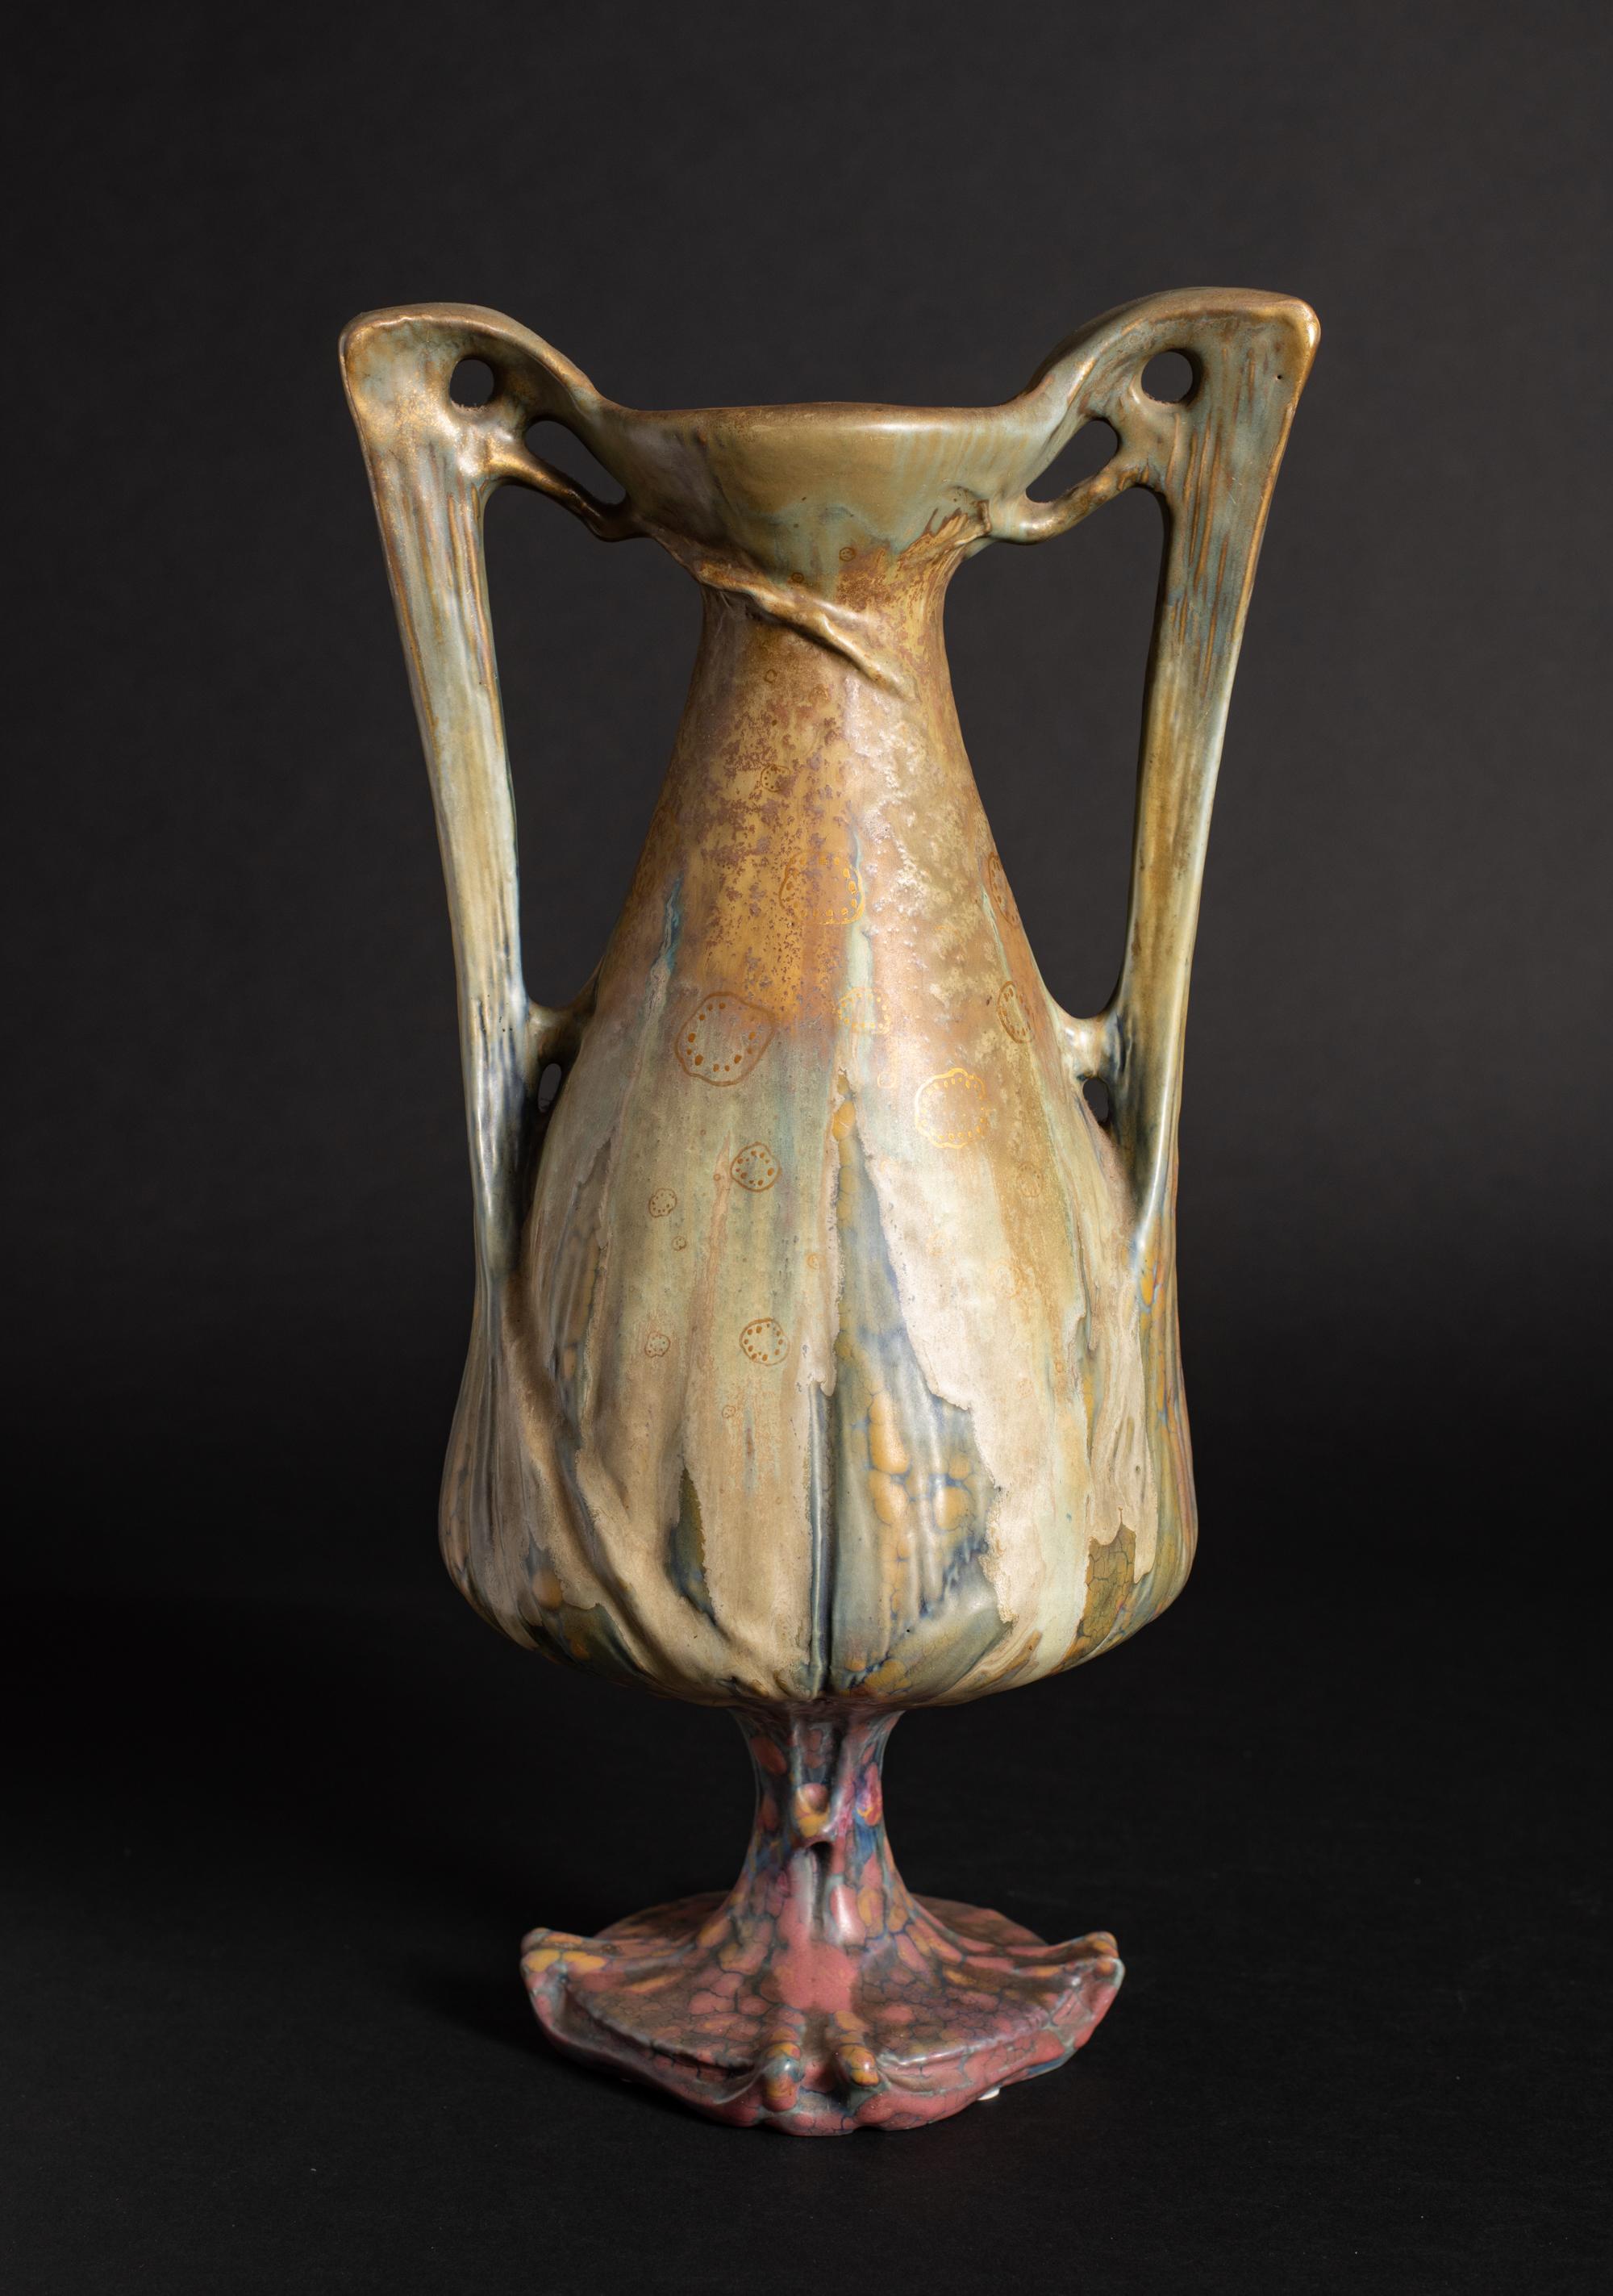 Model #3630

Riessner, Stellmacher and Kessel (RSt&K), consistently marked pieces with the tradename “Amphora” by the late 1890s and became known by that name. The Amphora pottery factory was located in Turn-Teplitz, Austria. By the mid-19th